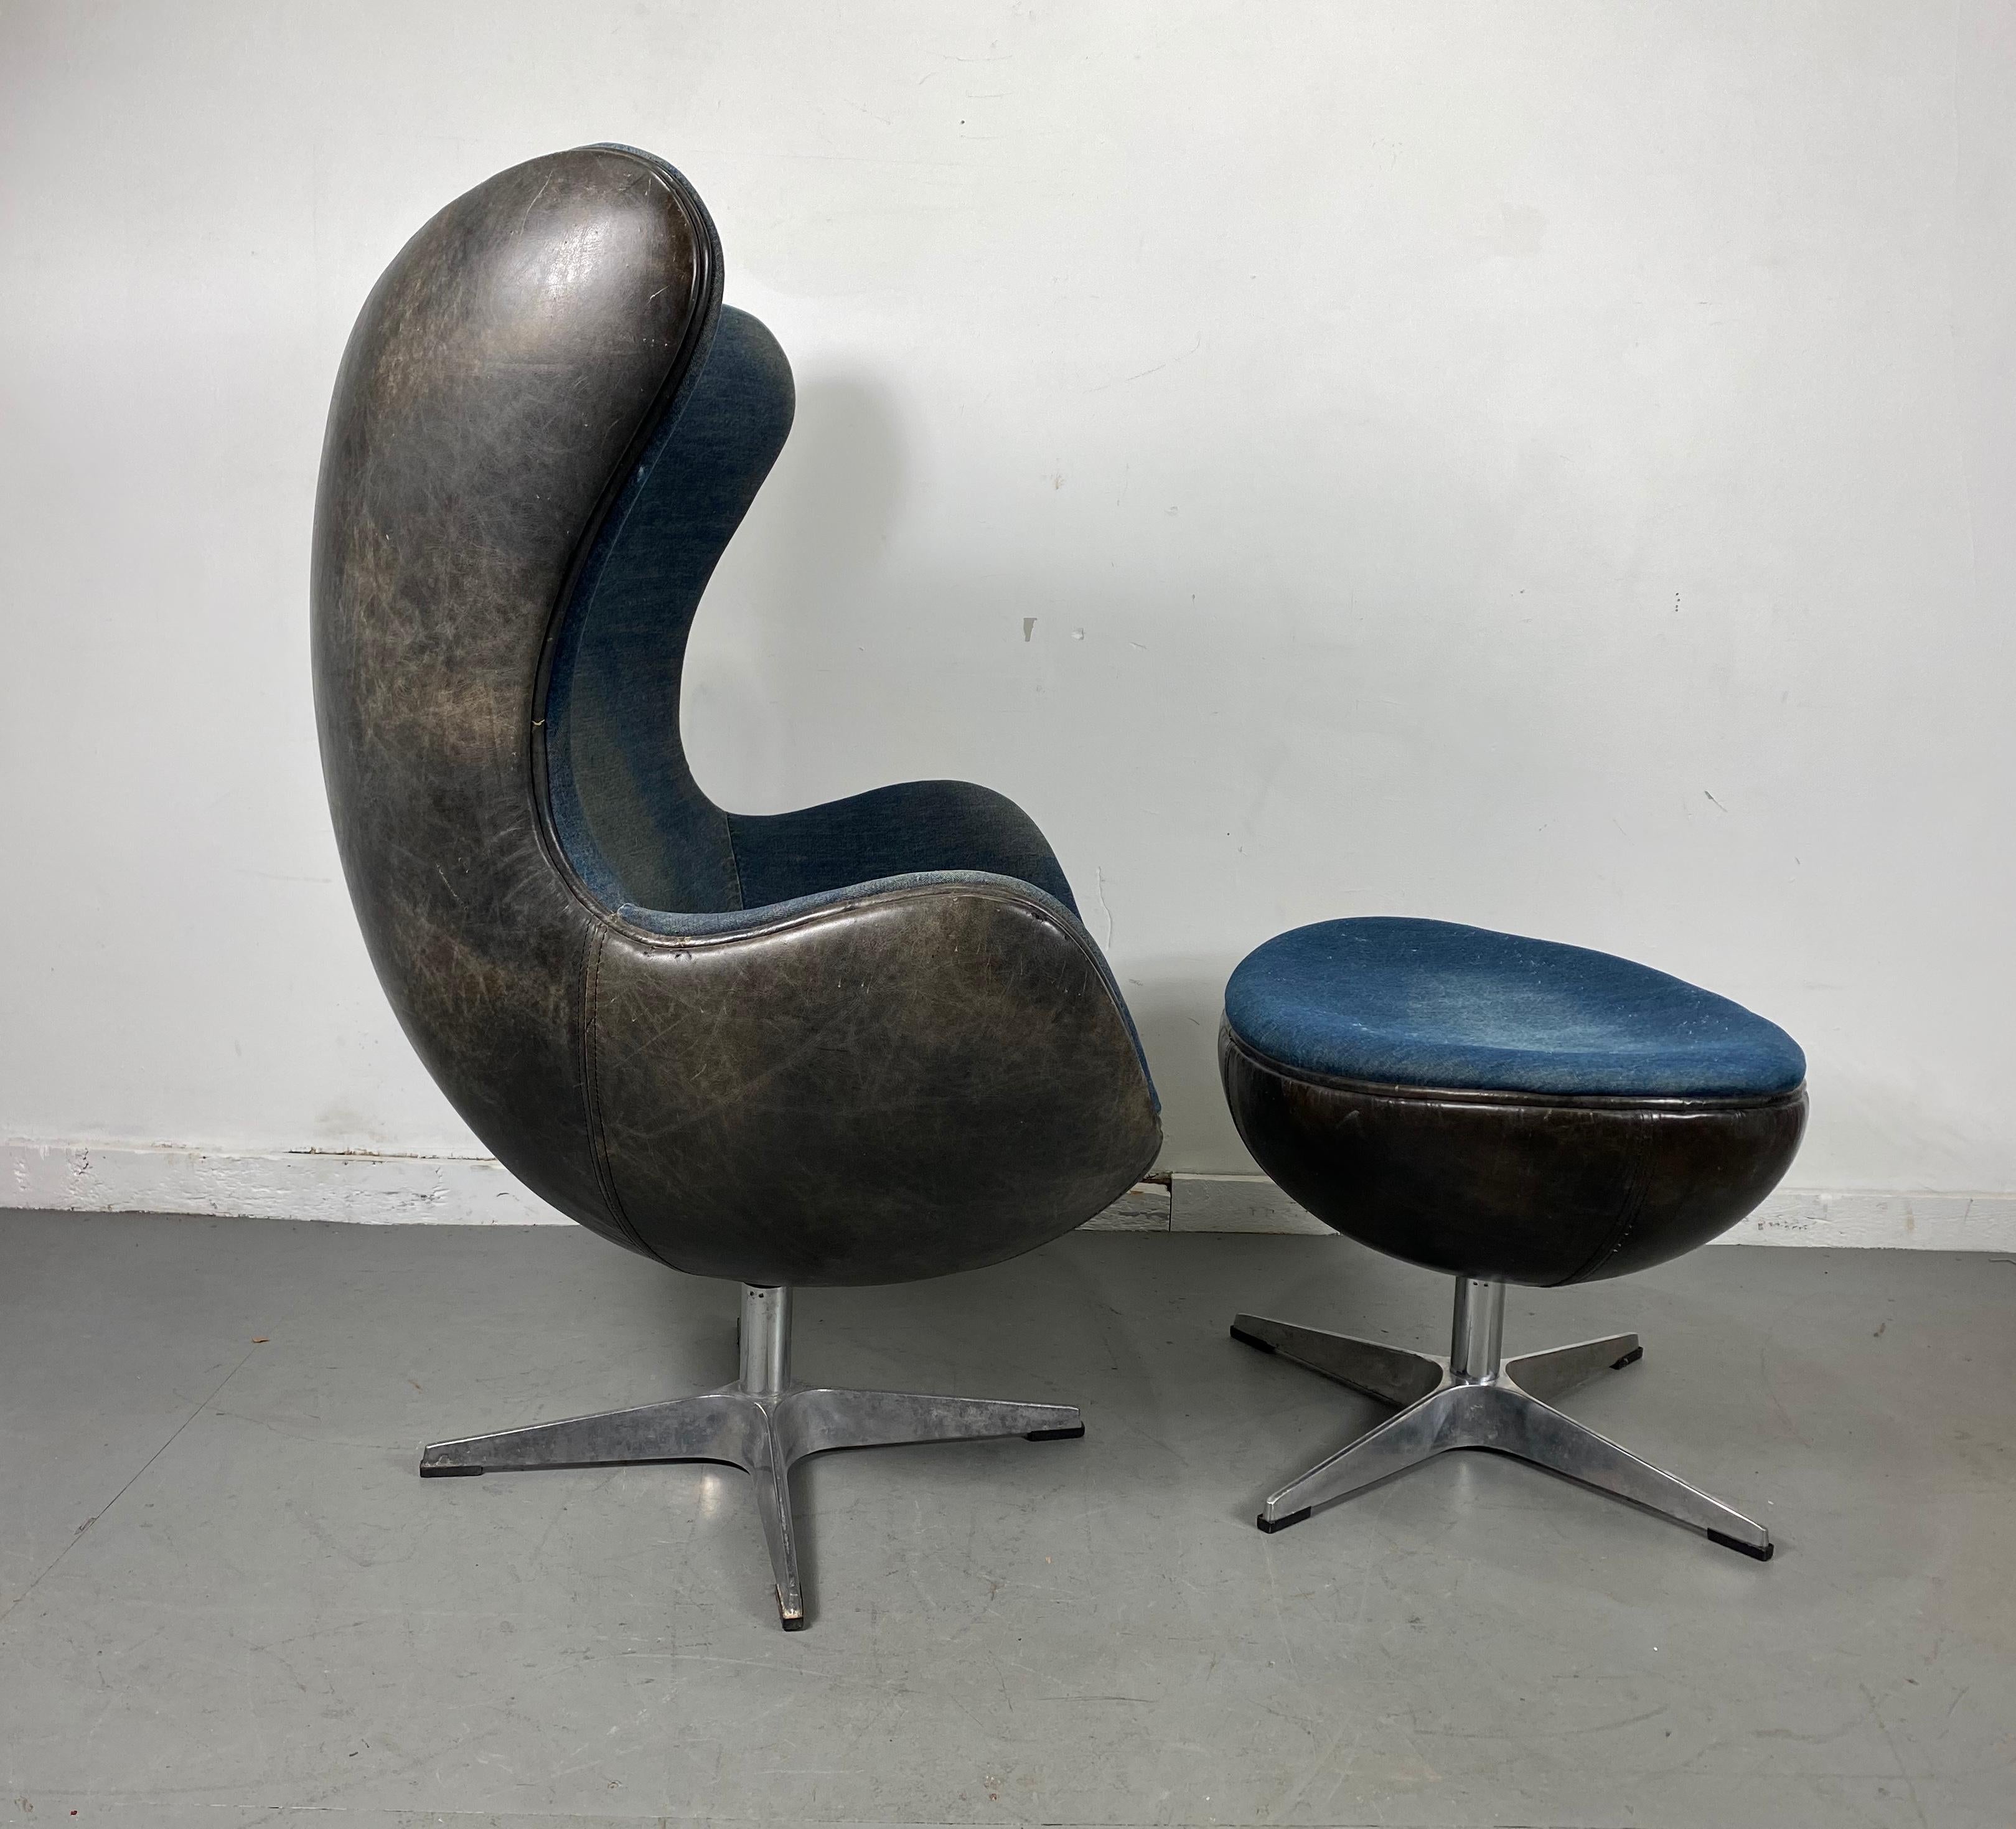 Classic egg chair and ottoman, black leather and denim. after Arne Jacobsen, vintage egg and ottoman, circa 1980s, beautifully worn thick black leather shell, denim interior and top of ottoman, aluminum bases in ruff condition, have not polished /